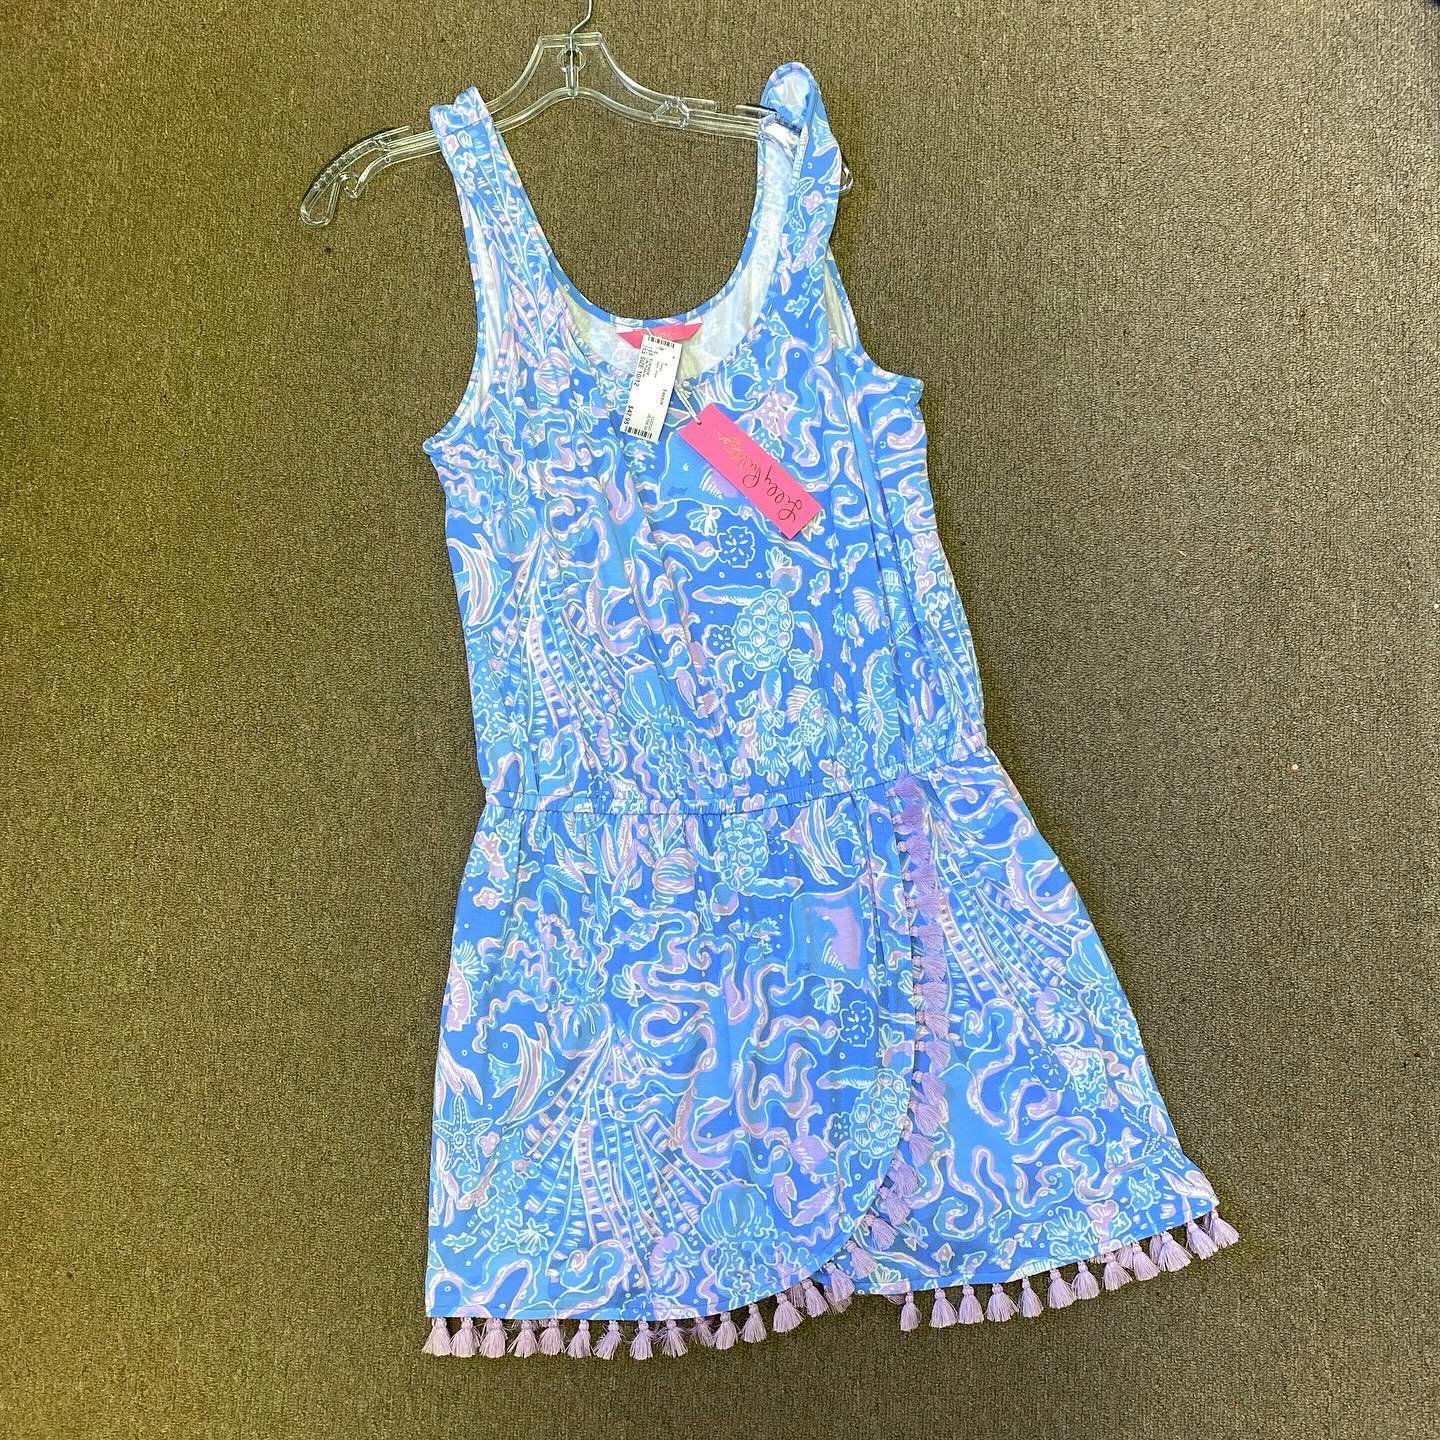 New with tags Lilly Pulitzer Dress with tassels and built in shorts, retail $138, size L (10/12), our price $47.95! 💙💙💙